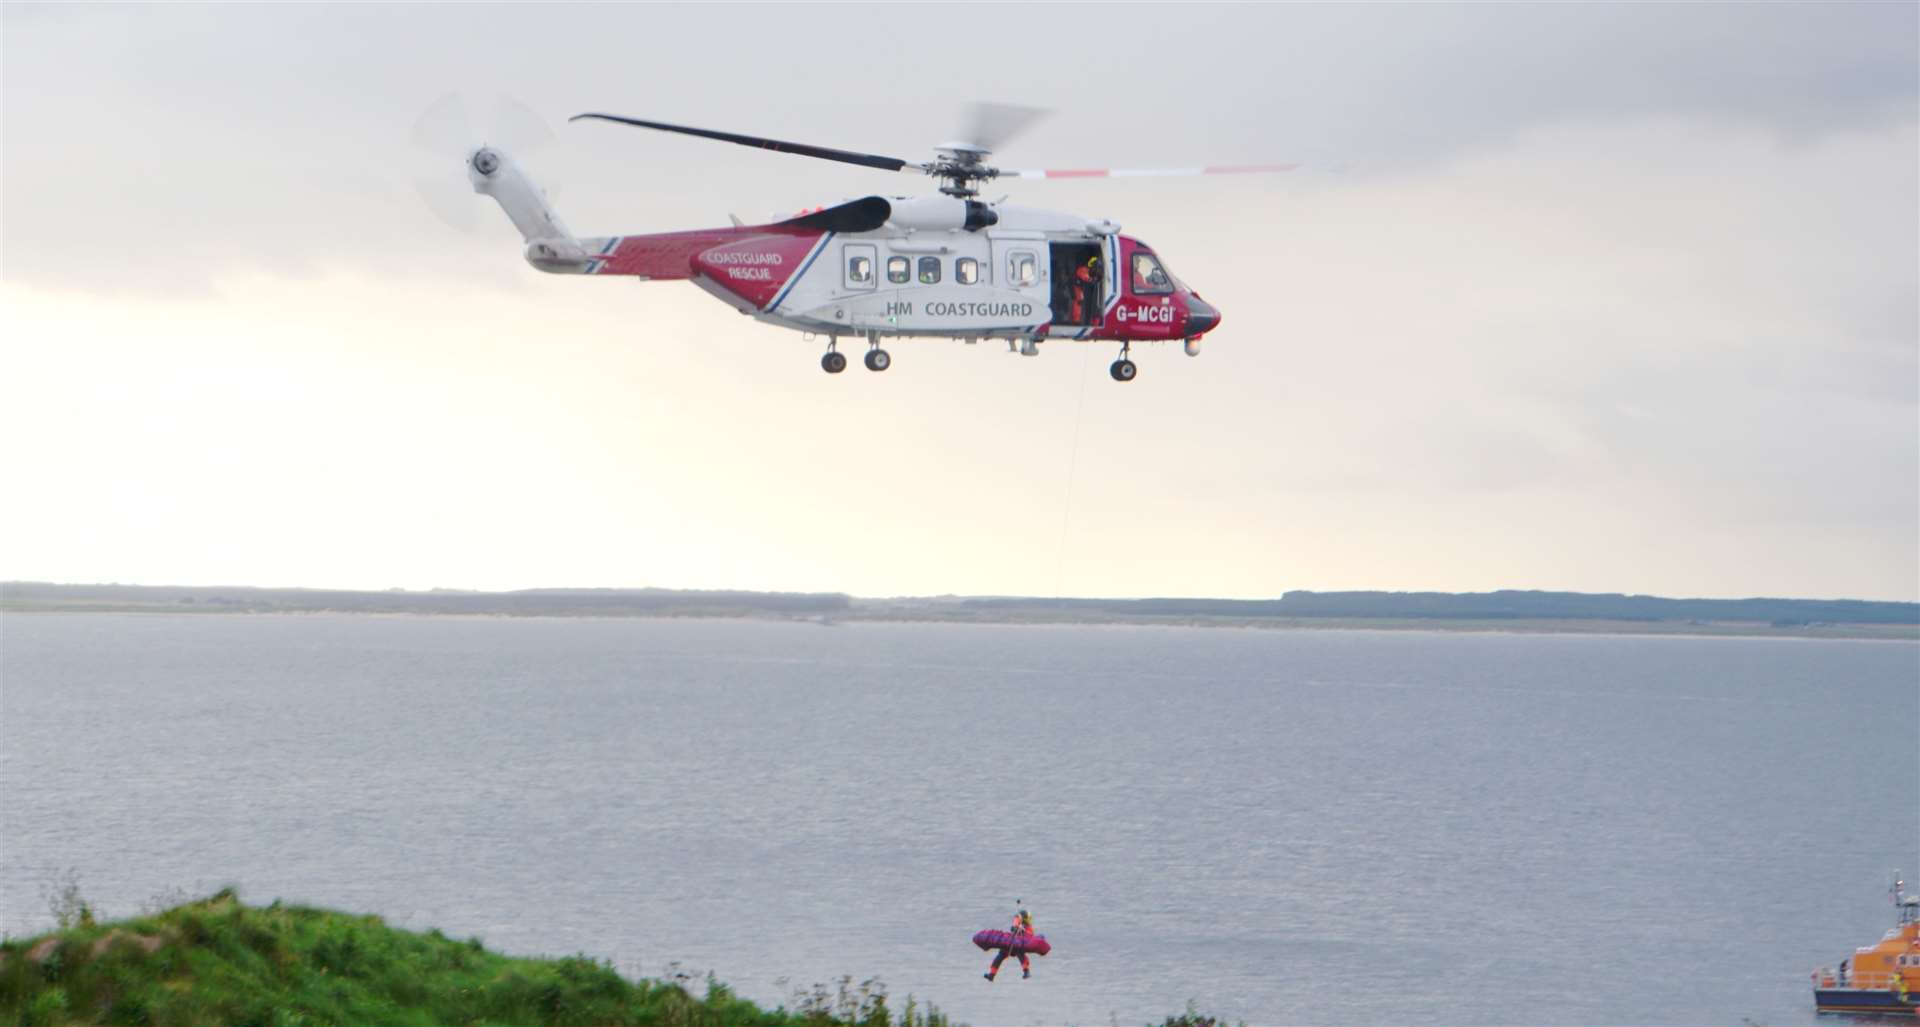 The injured boy is winched on board the coastguard helicopter.